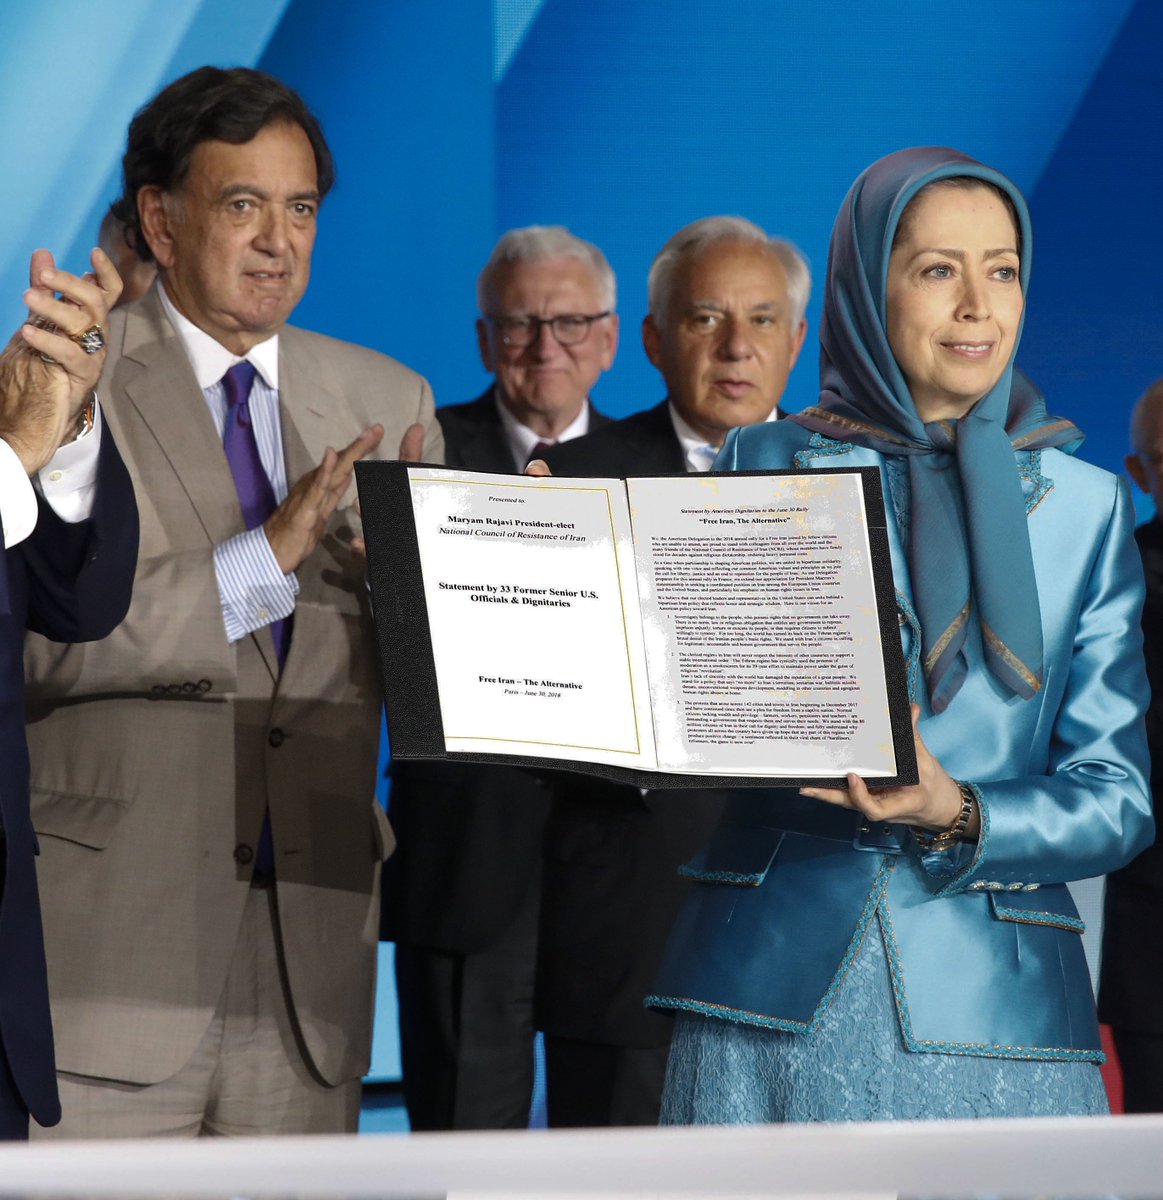 NCRI President-elect Maryam Rajavi on the passing of Gov. Bill Richardson: 'The United States has lost a distinguished political figure, while the Iranian Resistance has been deprived of a stalwart ally. The unexpected passing of Ambassador Bill Richardson, a steadfast advocate…